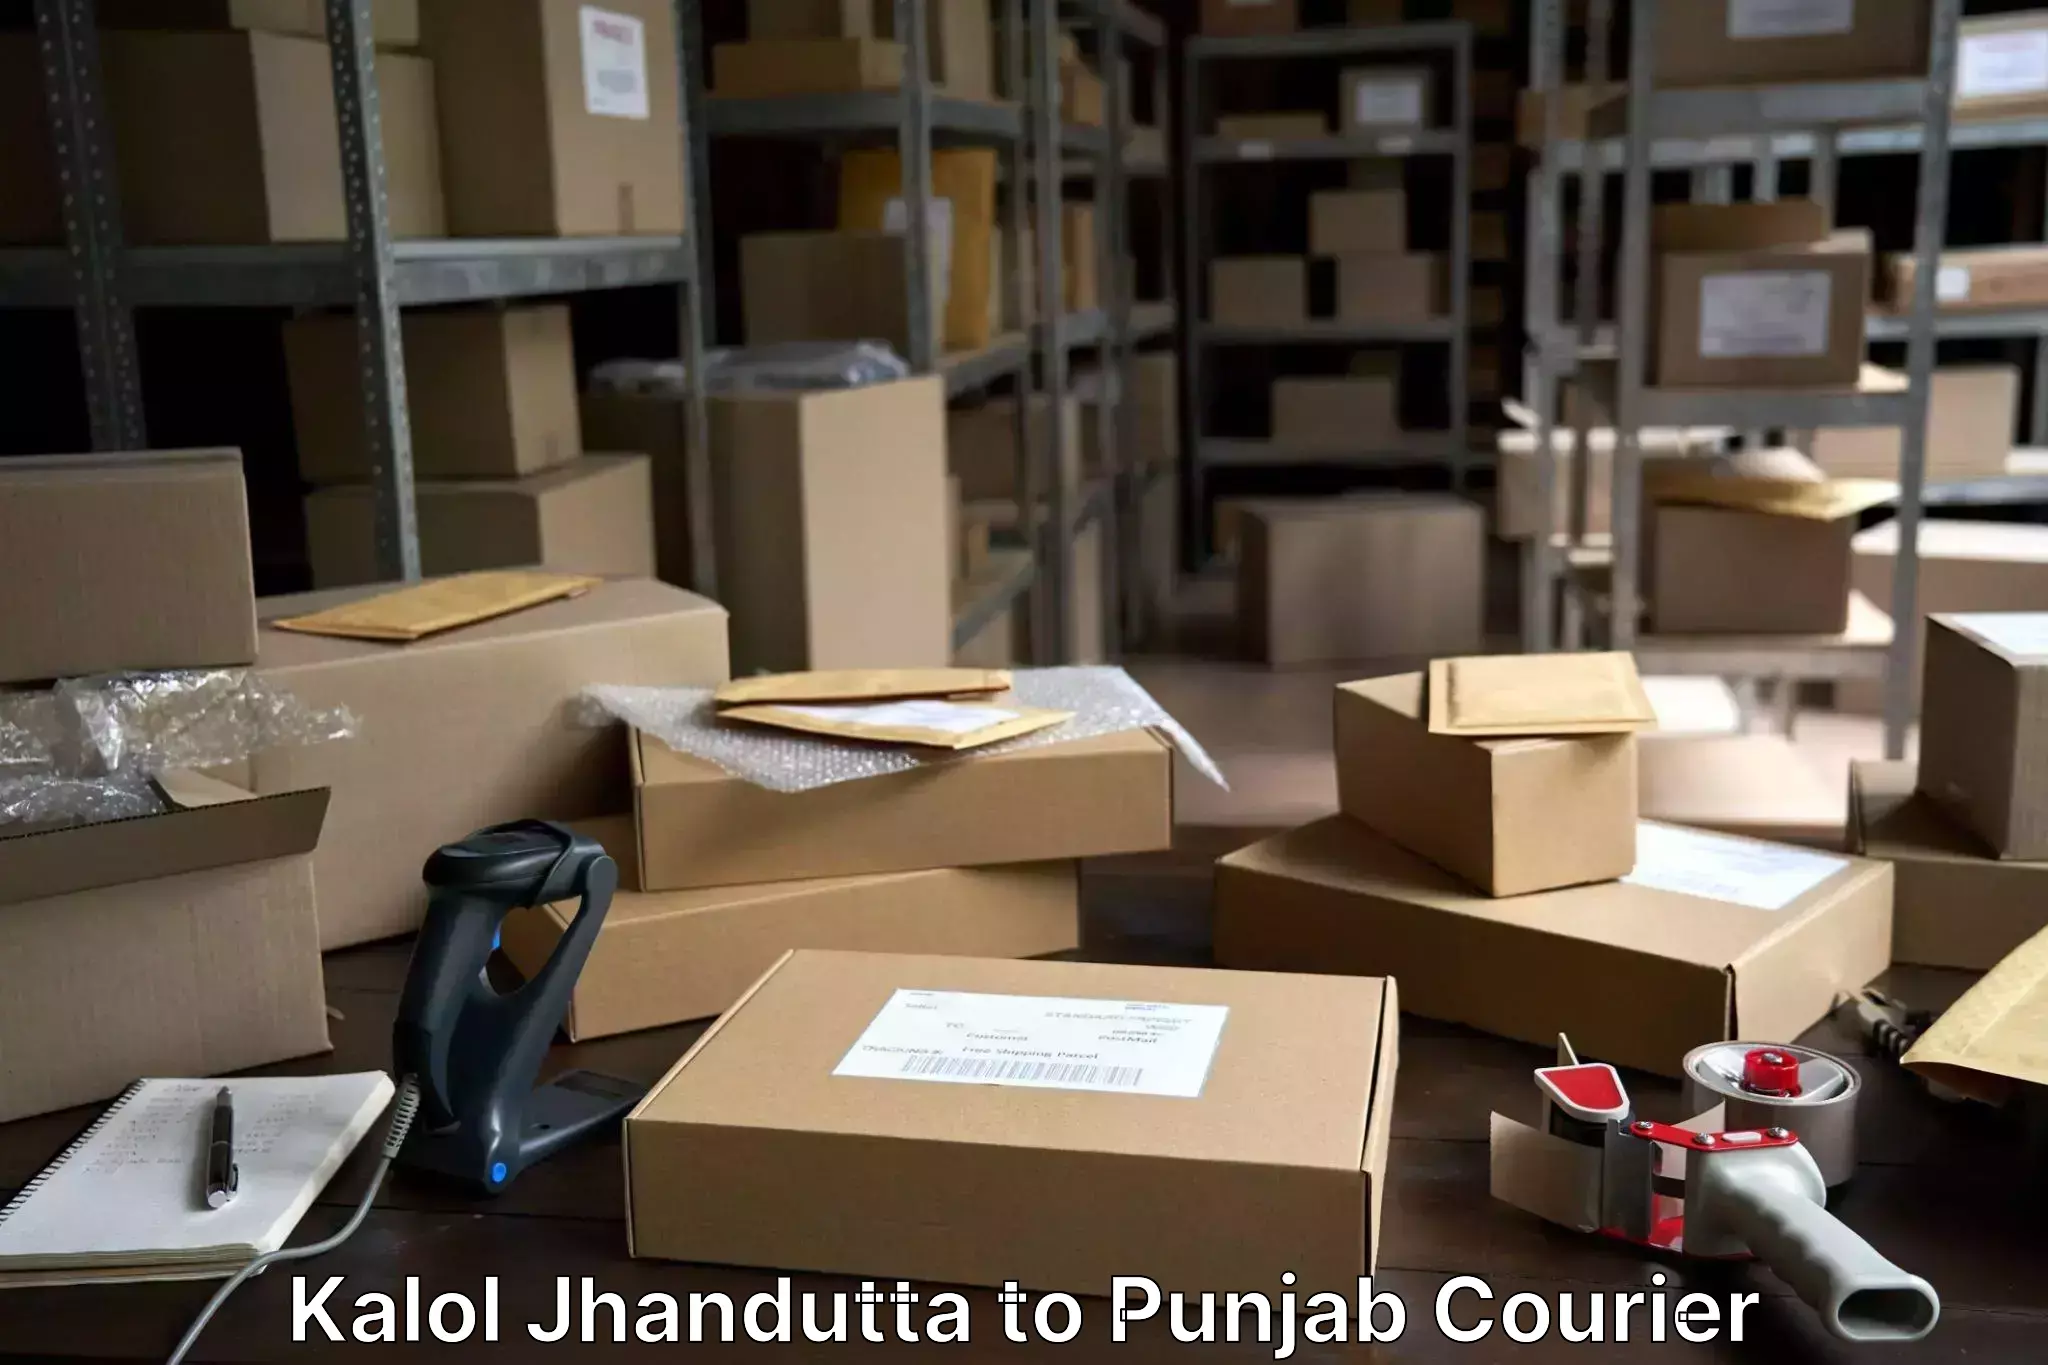 Personal effects shipping Kalol Jhandutta to Thapar Institute of Engineering and Technology Patiala